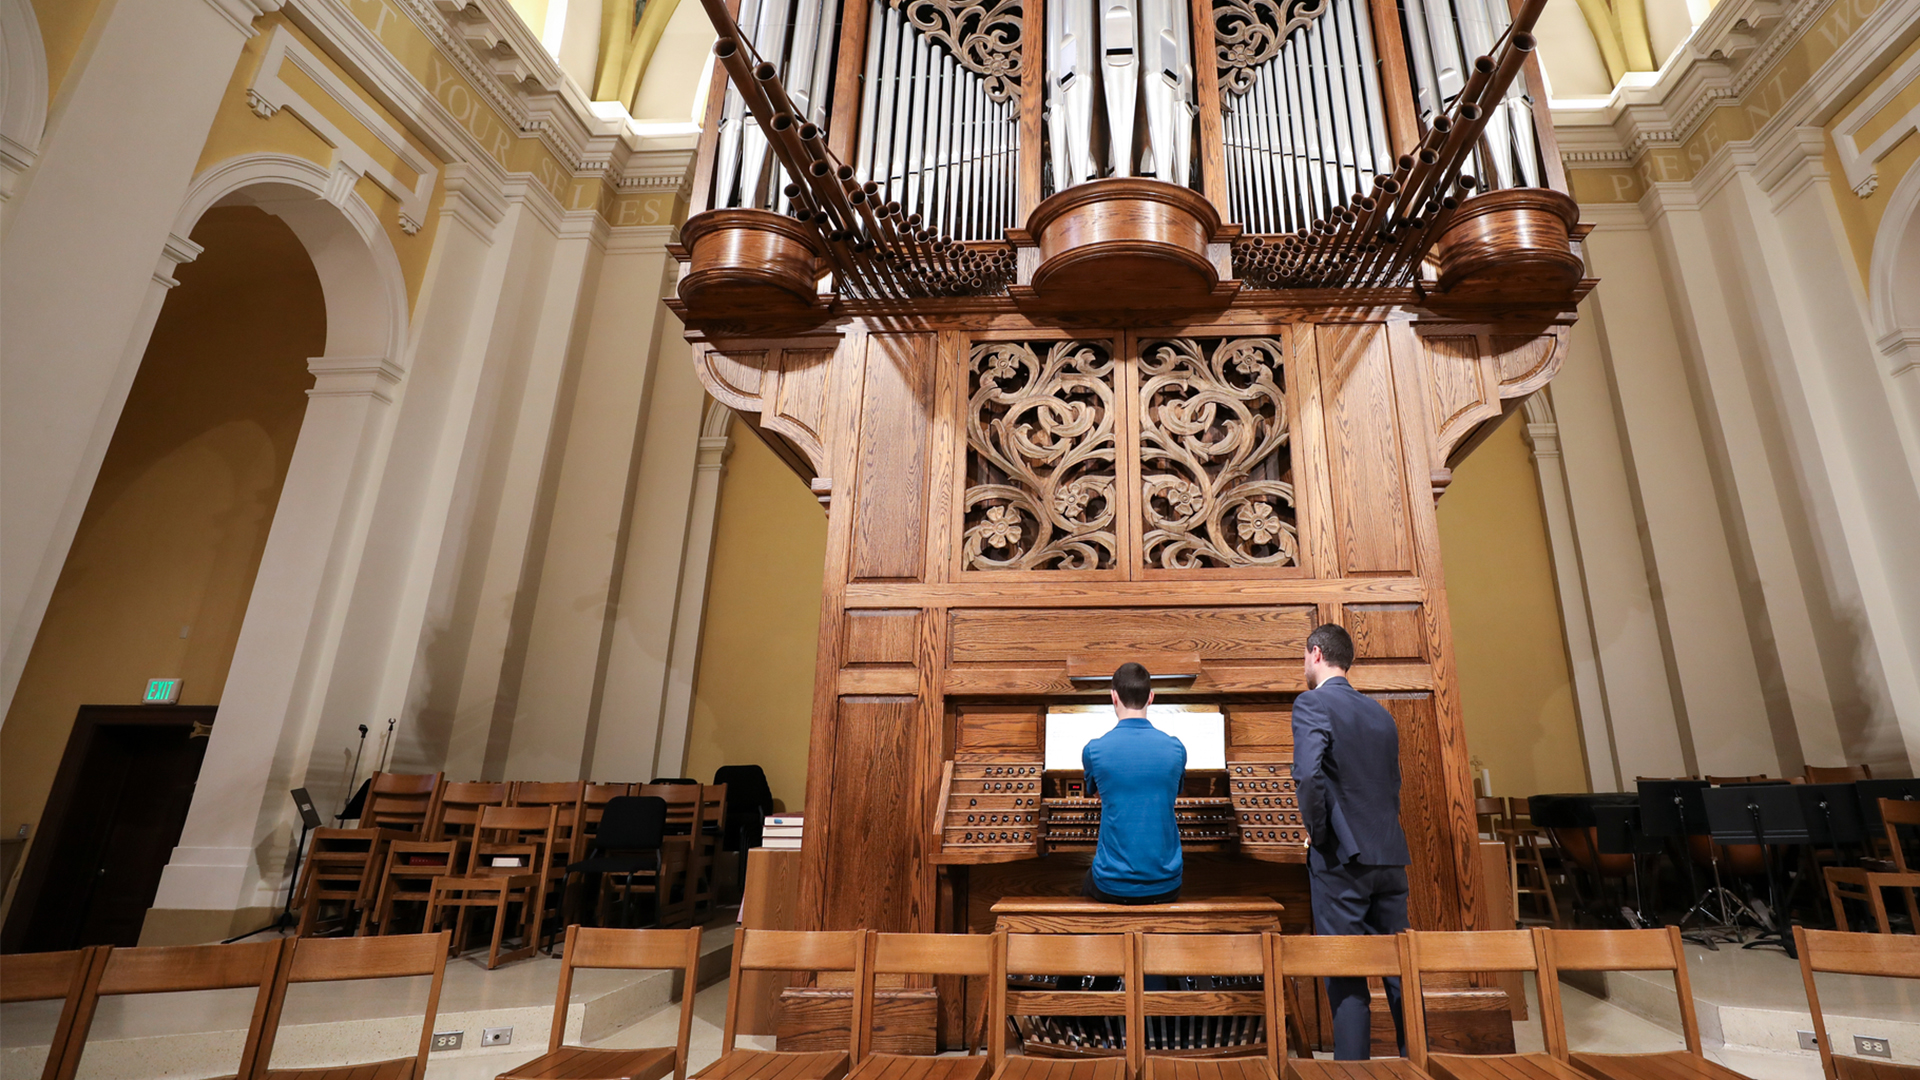 A student is instructed at the organ during a lesson in the Chapel of St. Thomas Aquinas